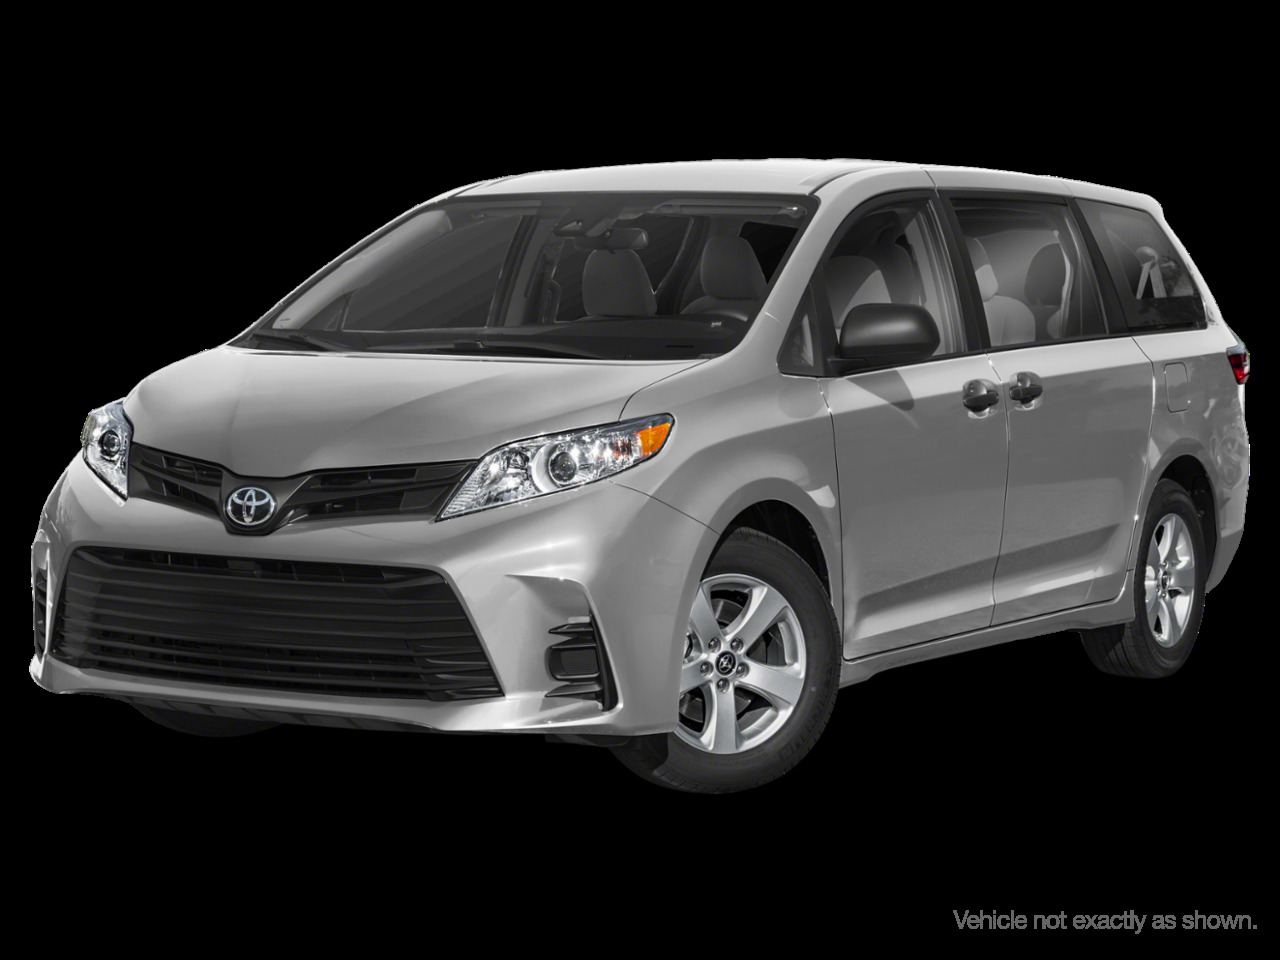 2019 Toyota Sienna XLE AWD 7-Passenger V6 |OpenRoad True Price |Local